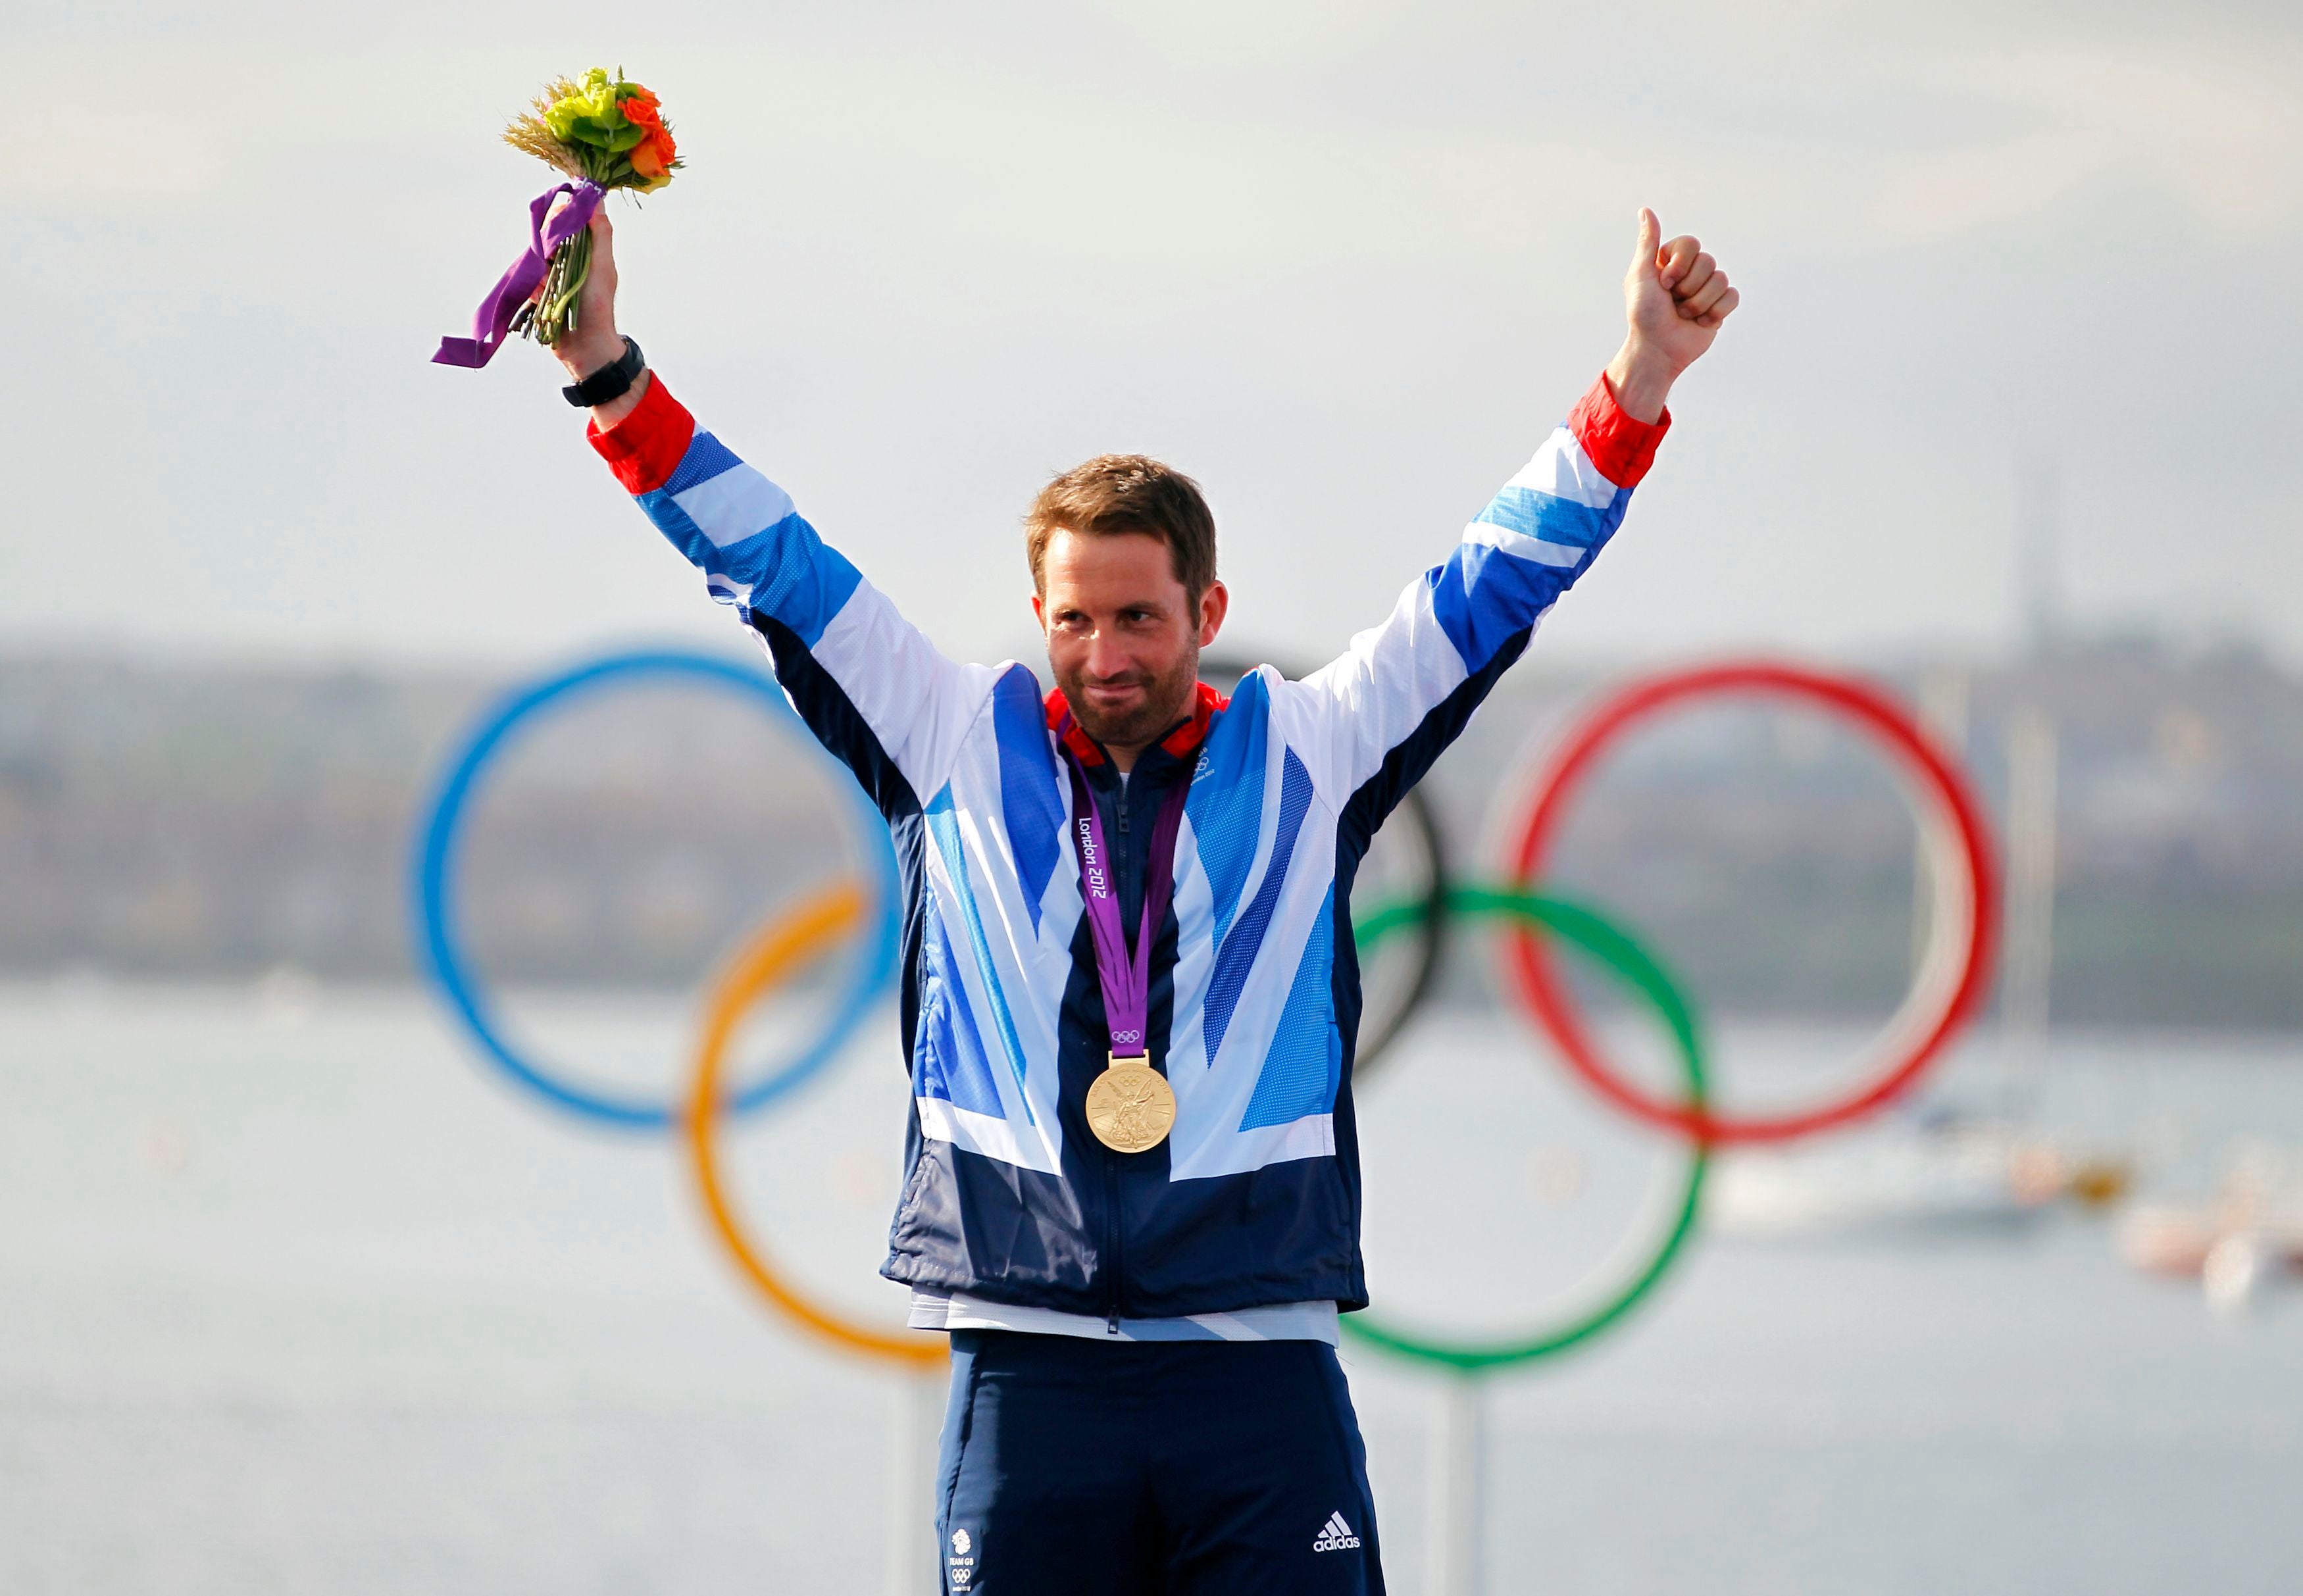 Ben Ainslie celebrated on the podium after winning gold in the Finn class (Chris Ison/PA)